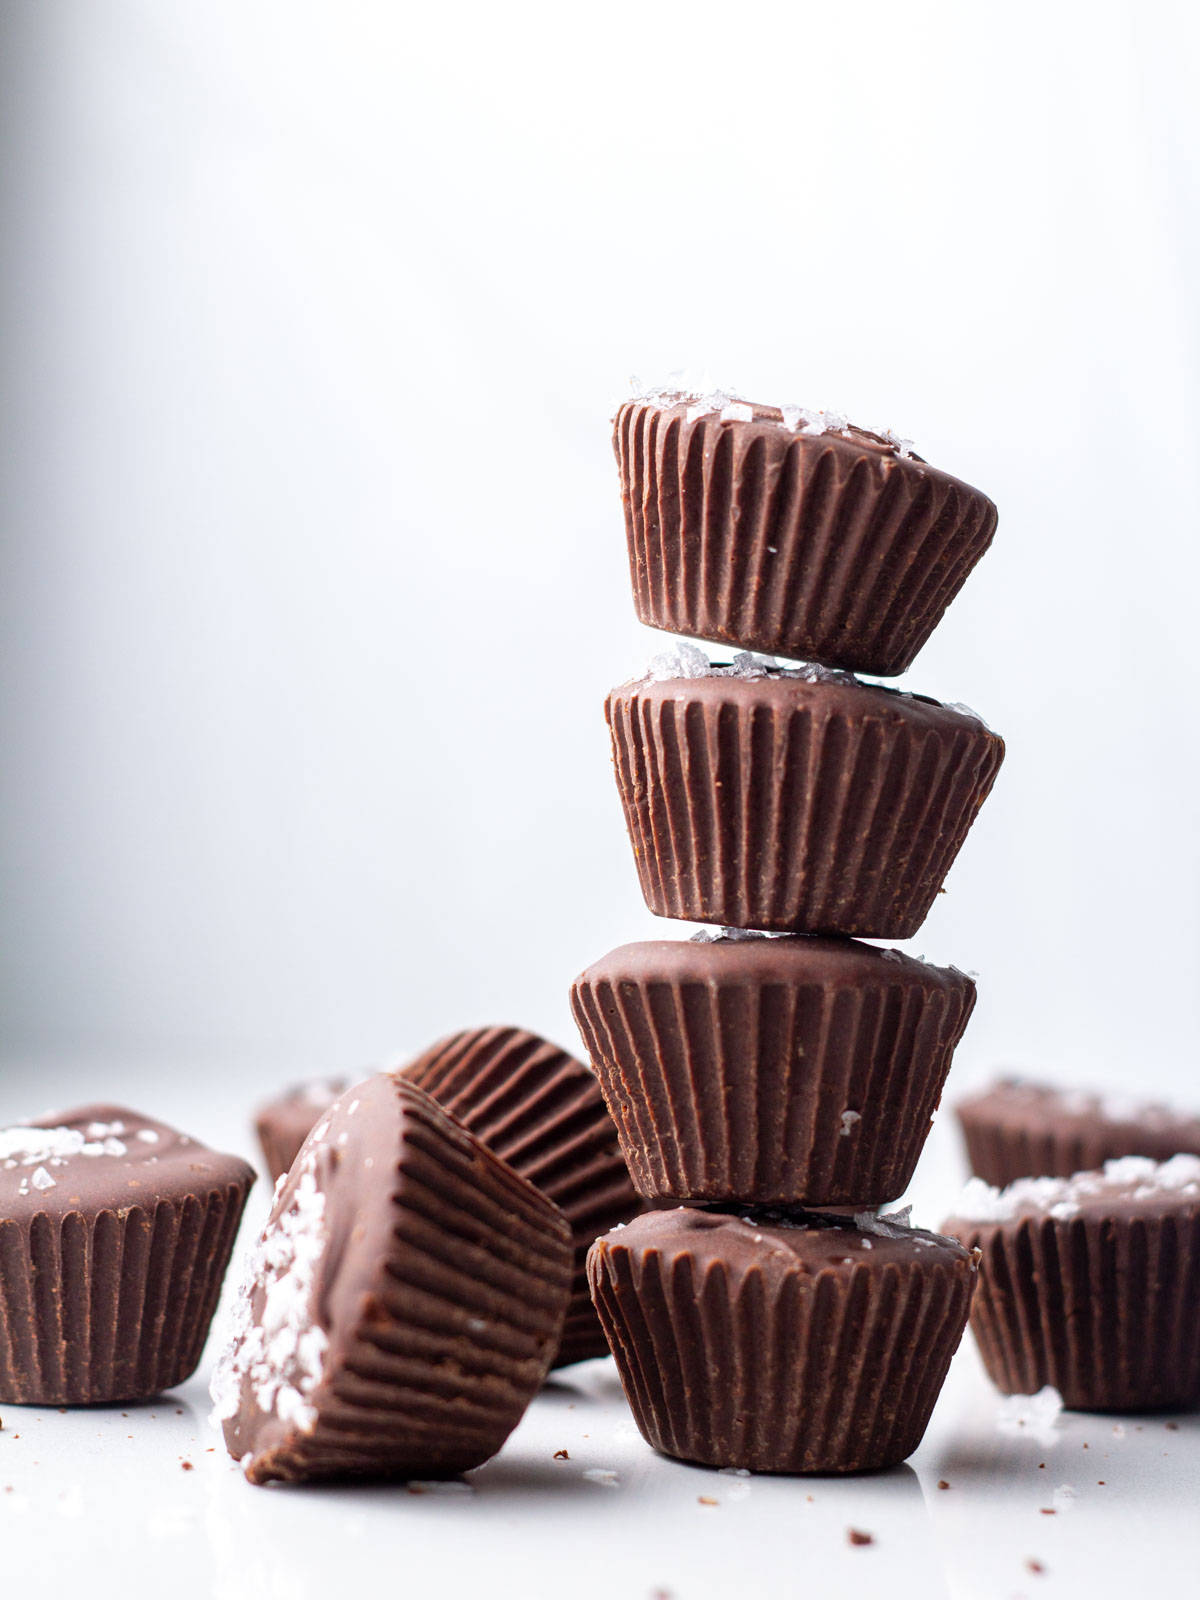 A side view of a stack of four Nutella cups surrounded by more Nutella cups.